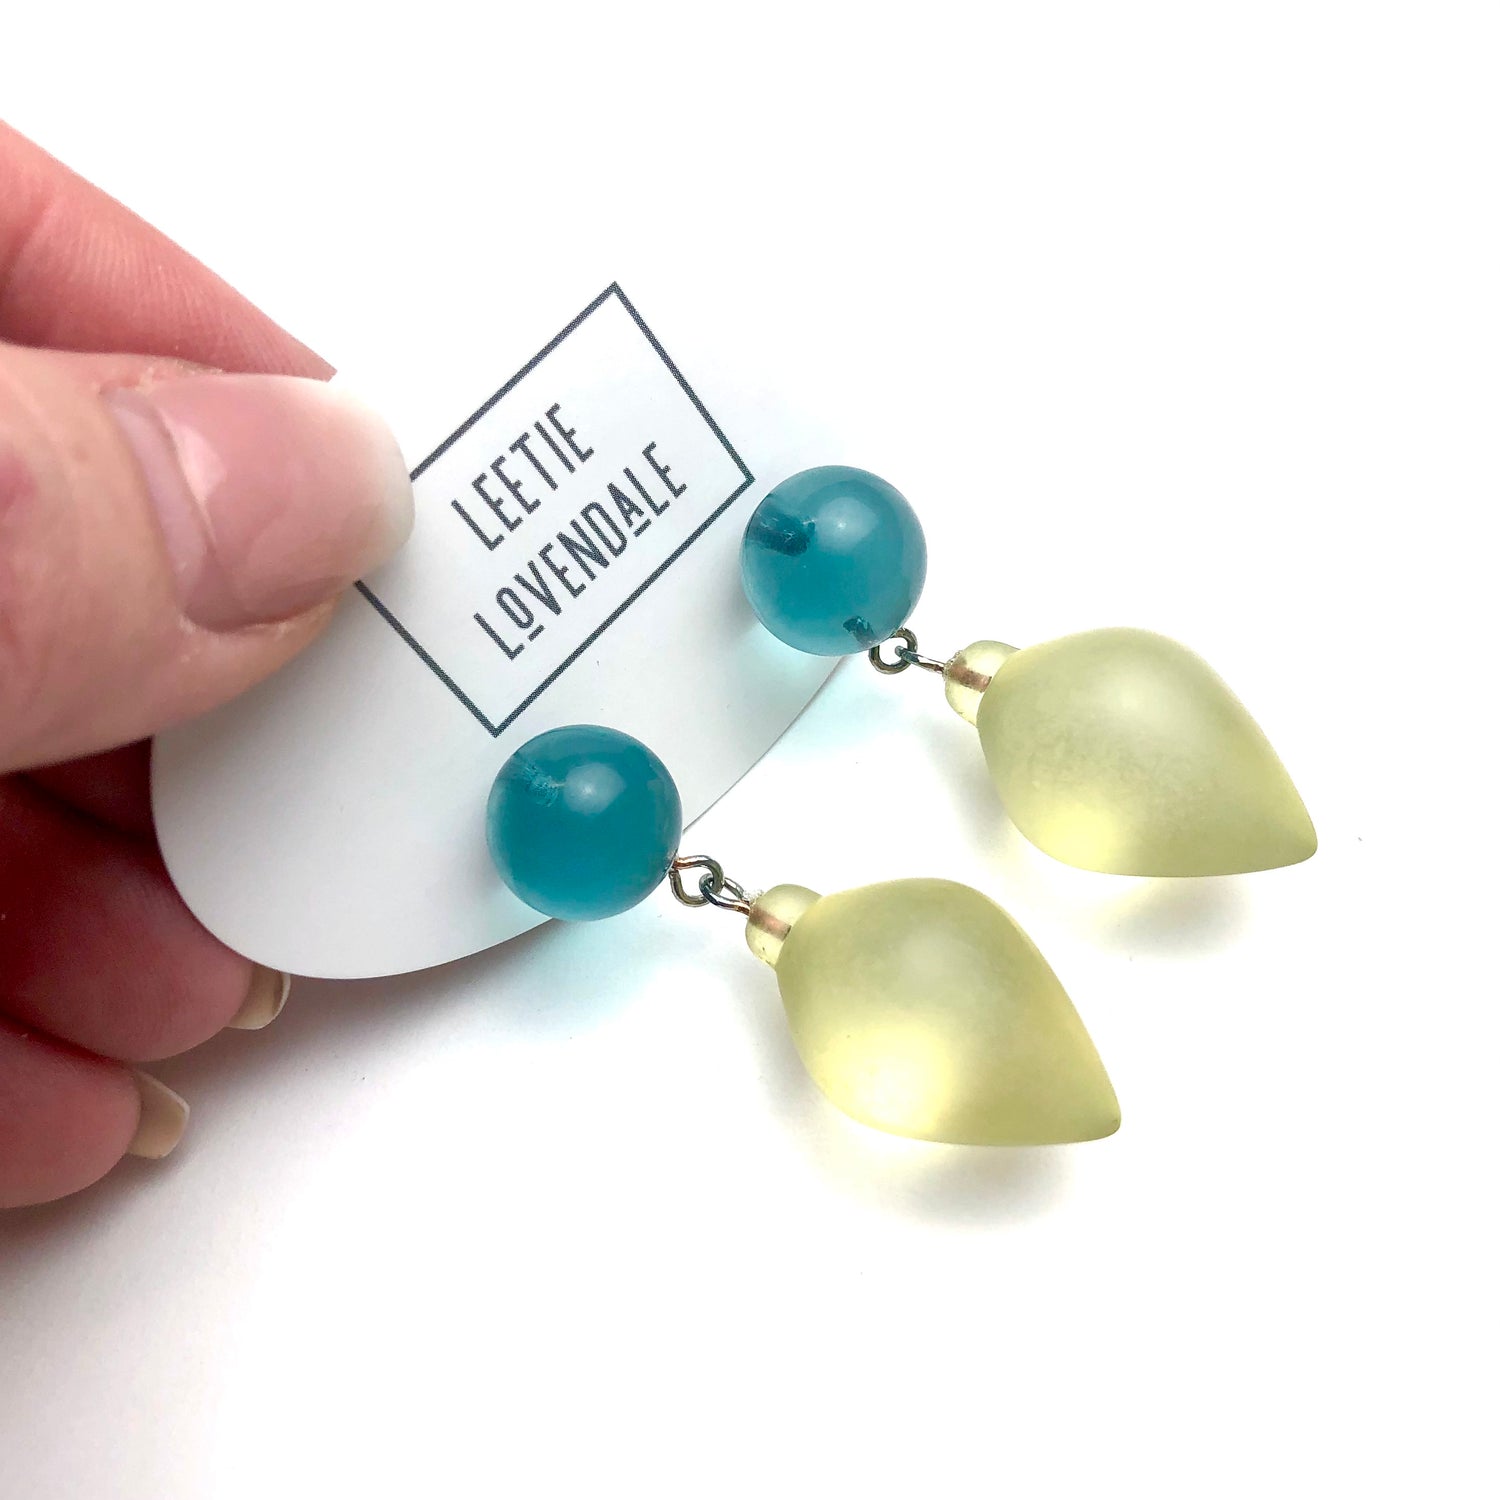 teal and mint earrings